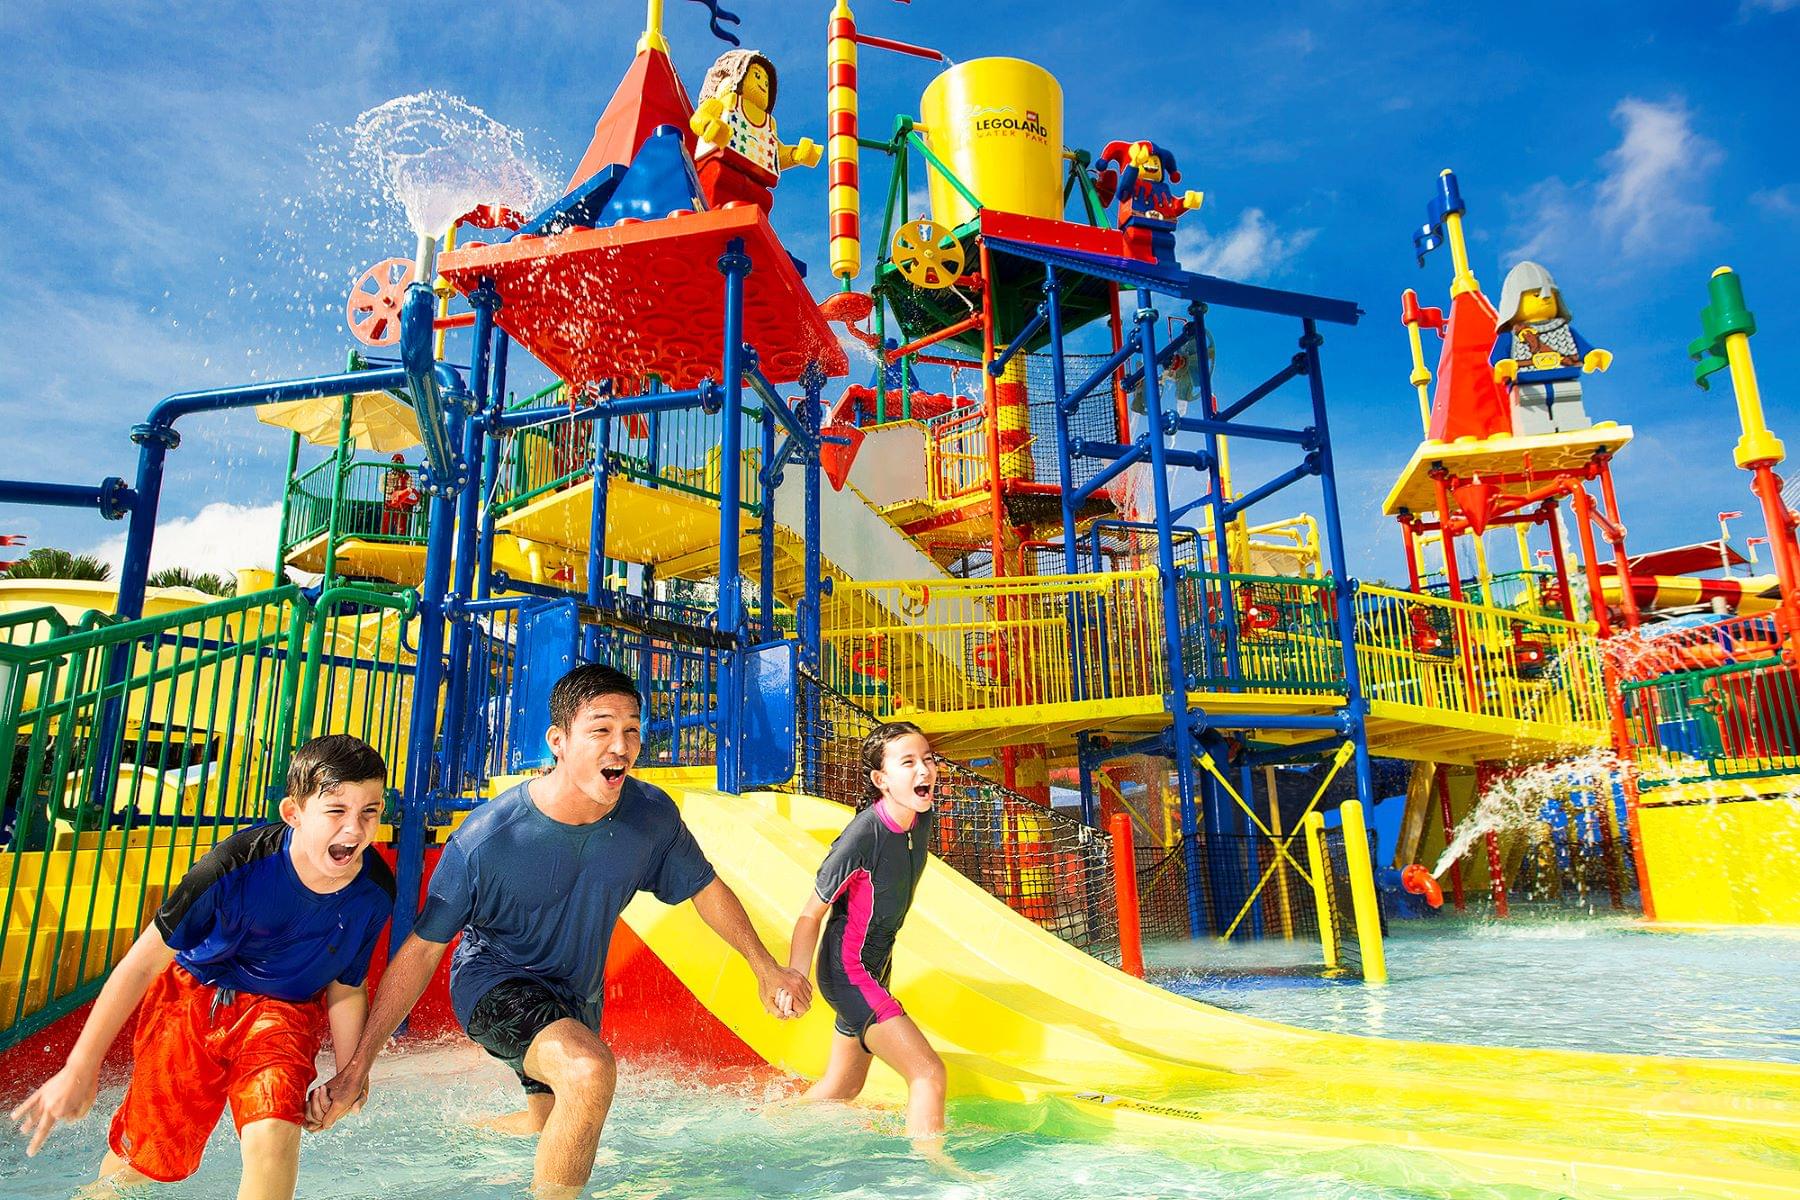 Have a fun time at water slides with whole family